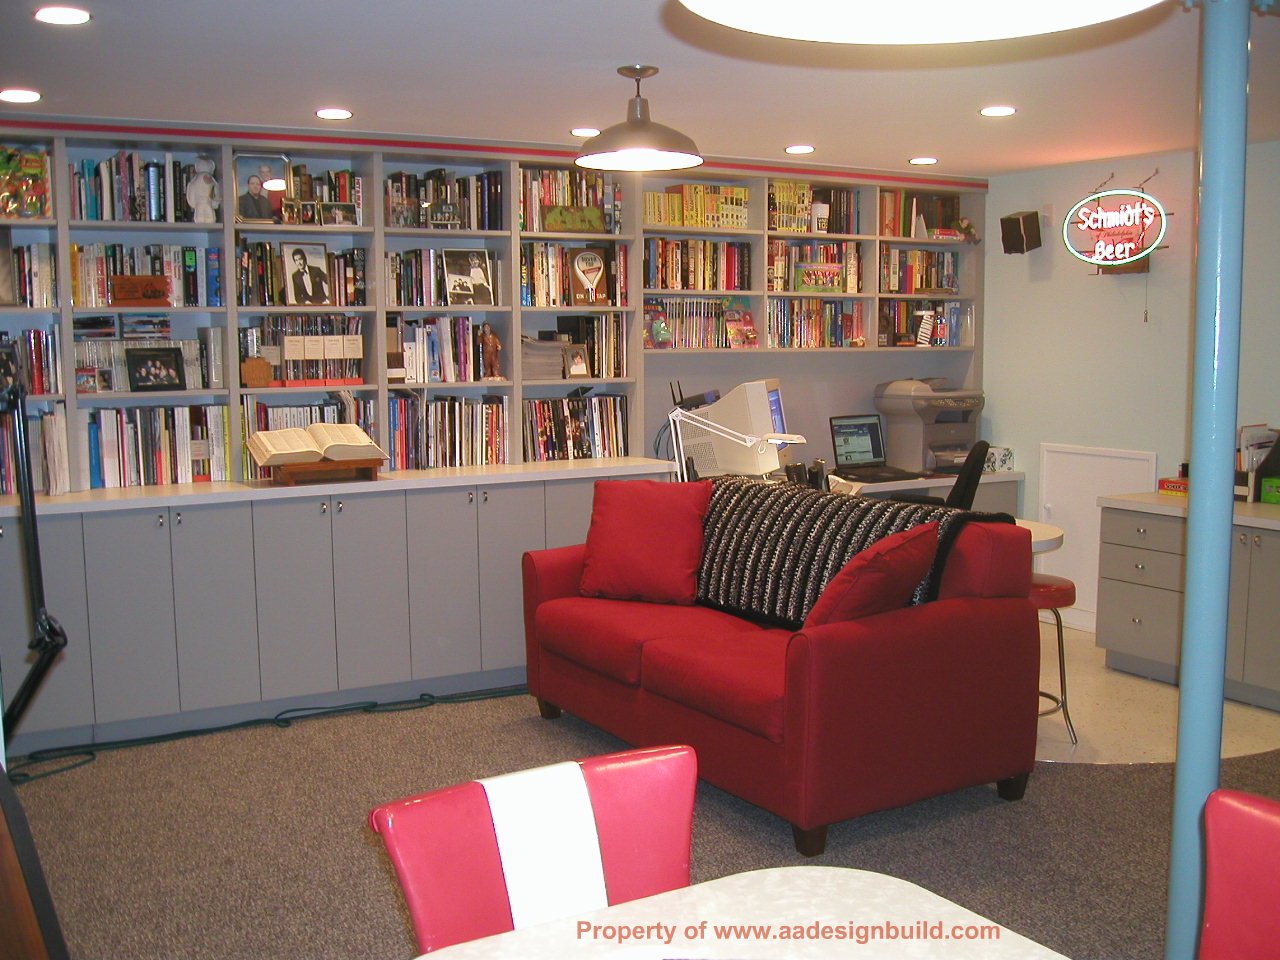 www.aadesignbuild.com, Film Critic's Home Office, Finished ...